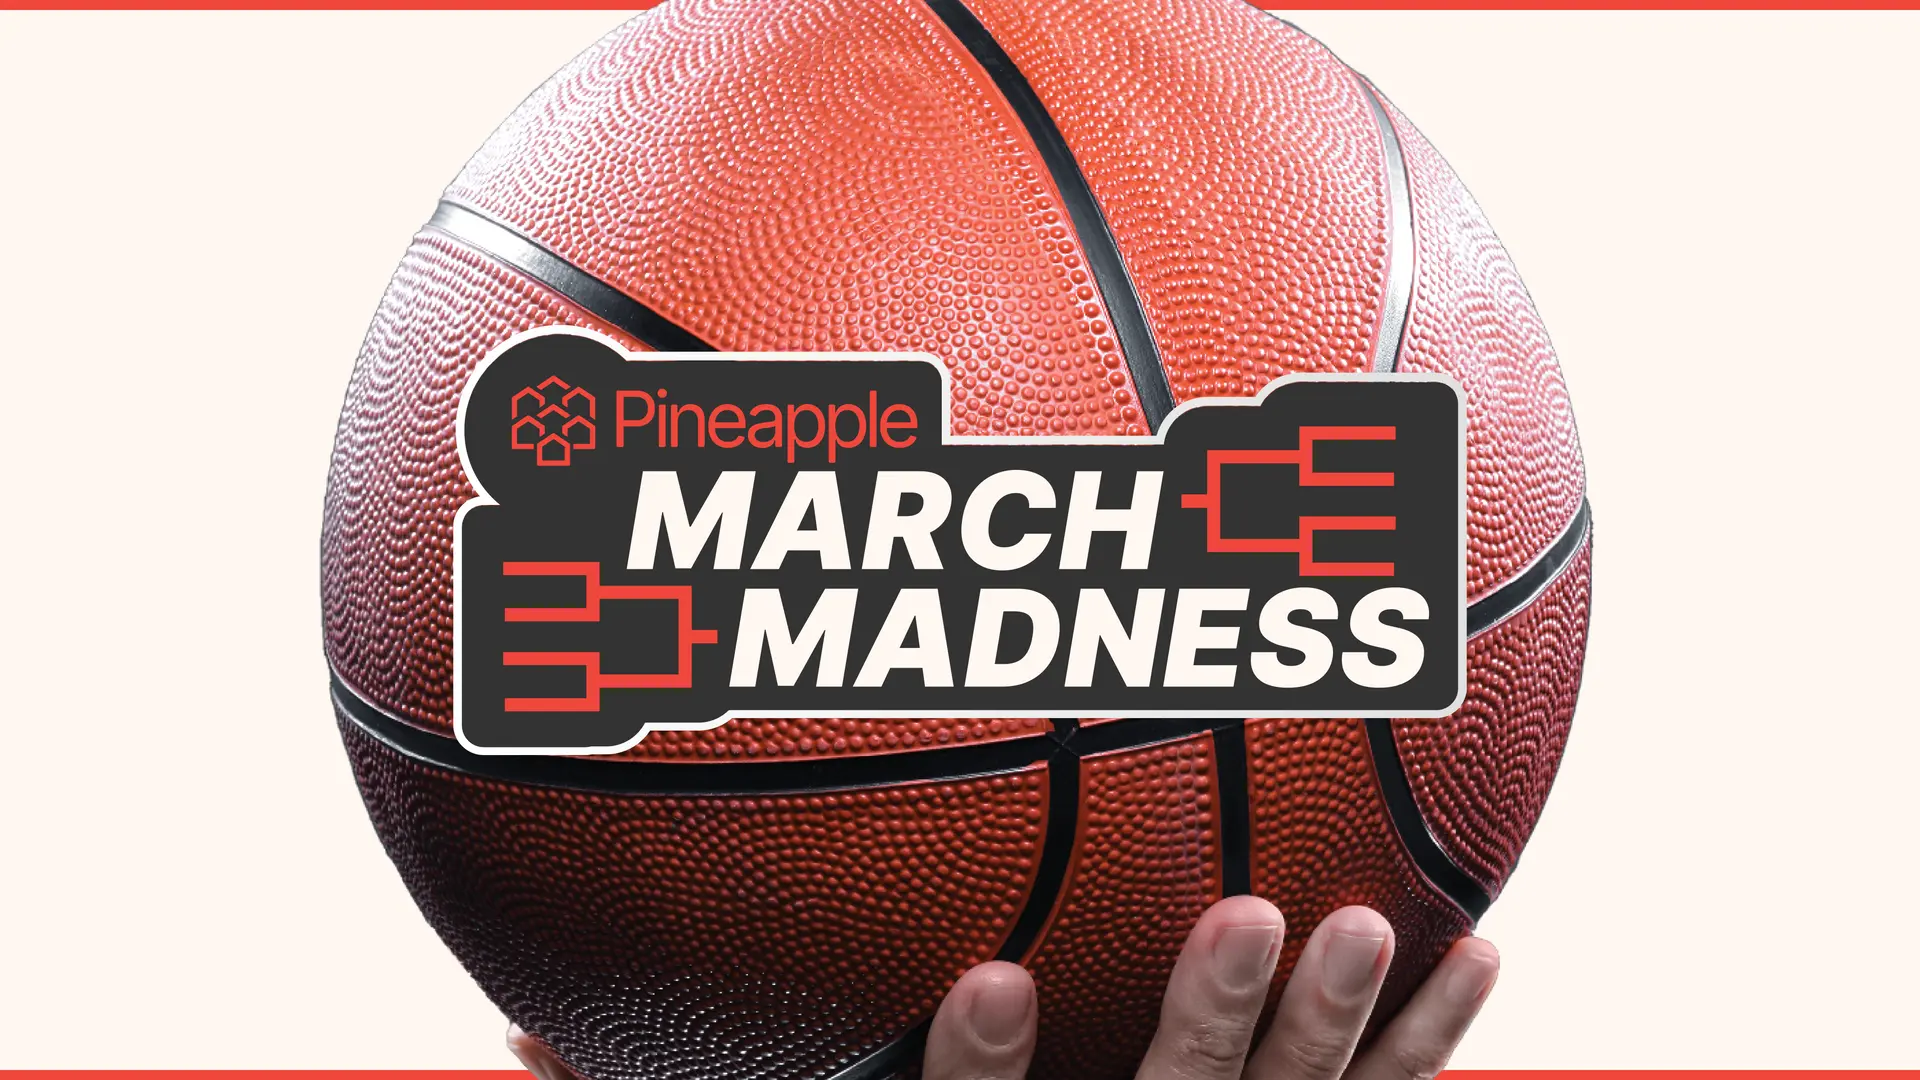 Pineapple's March Madness Charity Basketball Tournament 